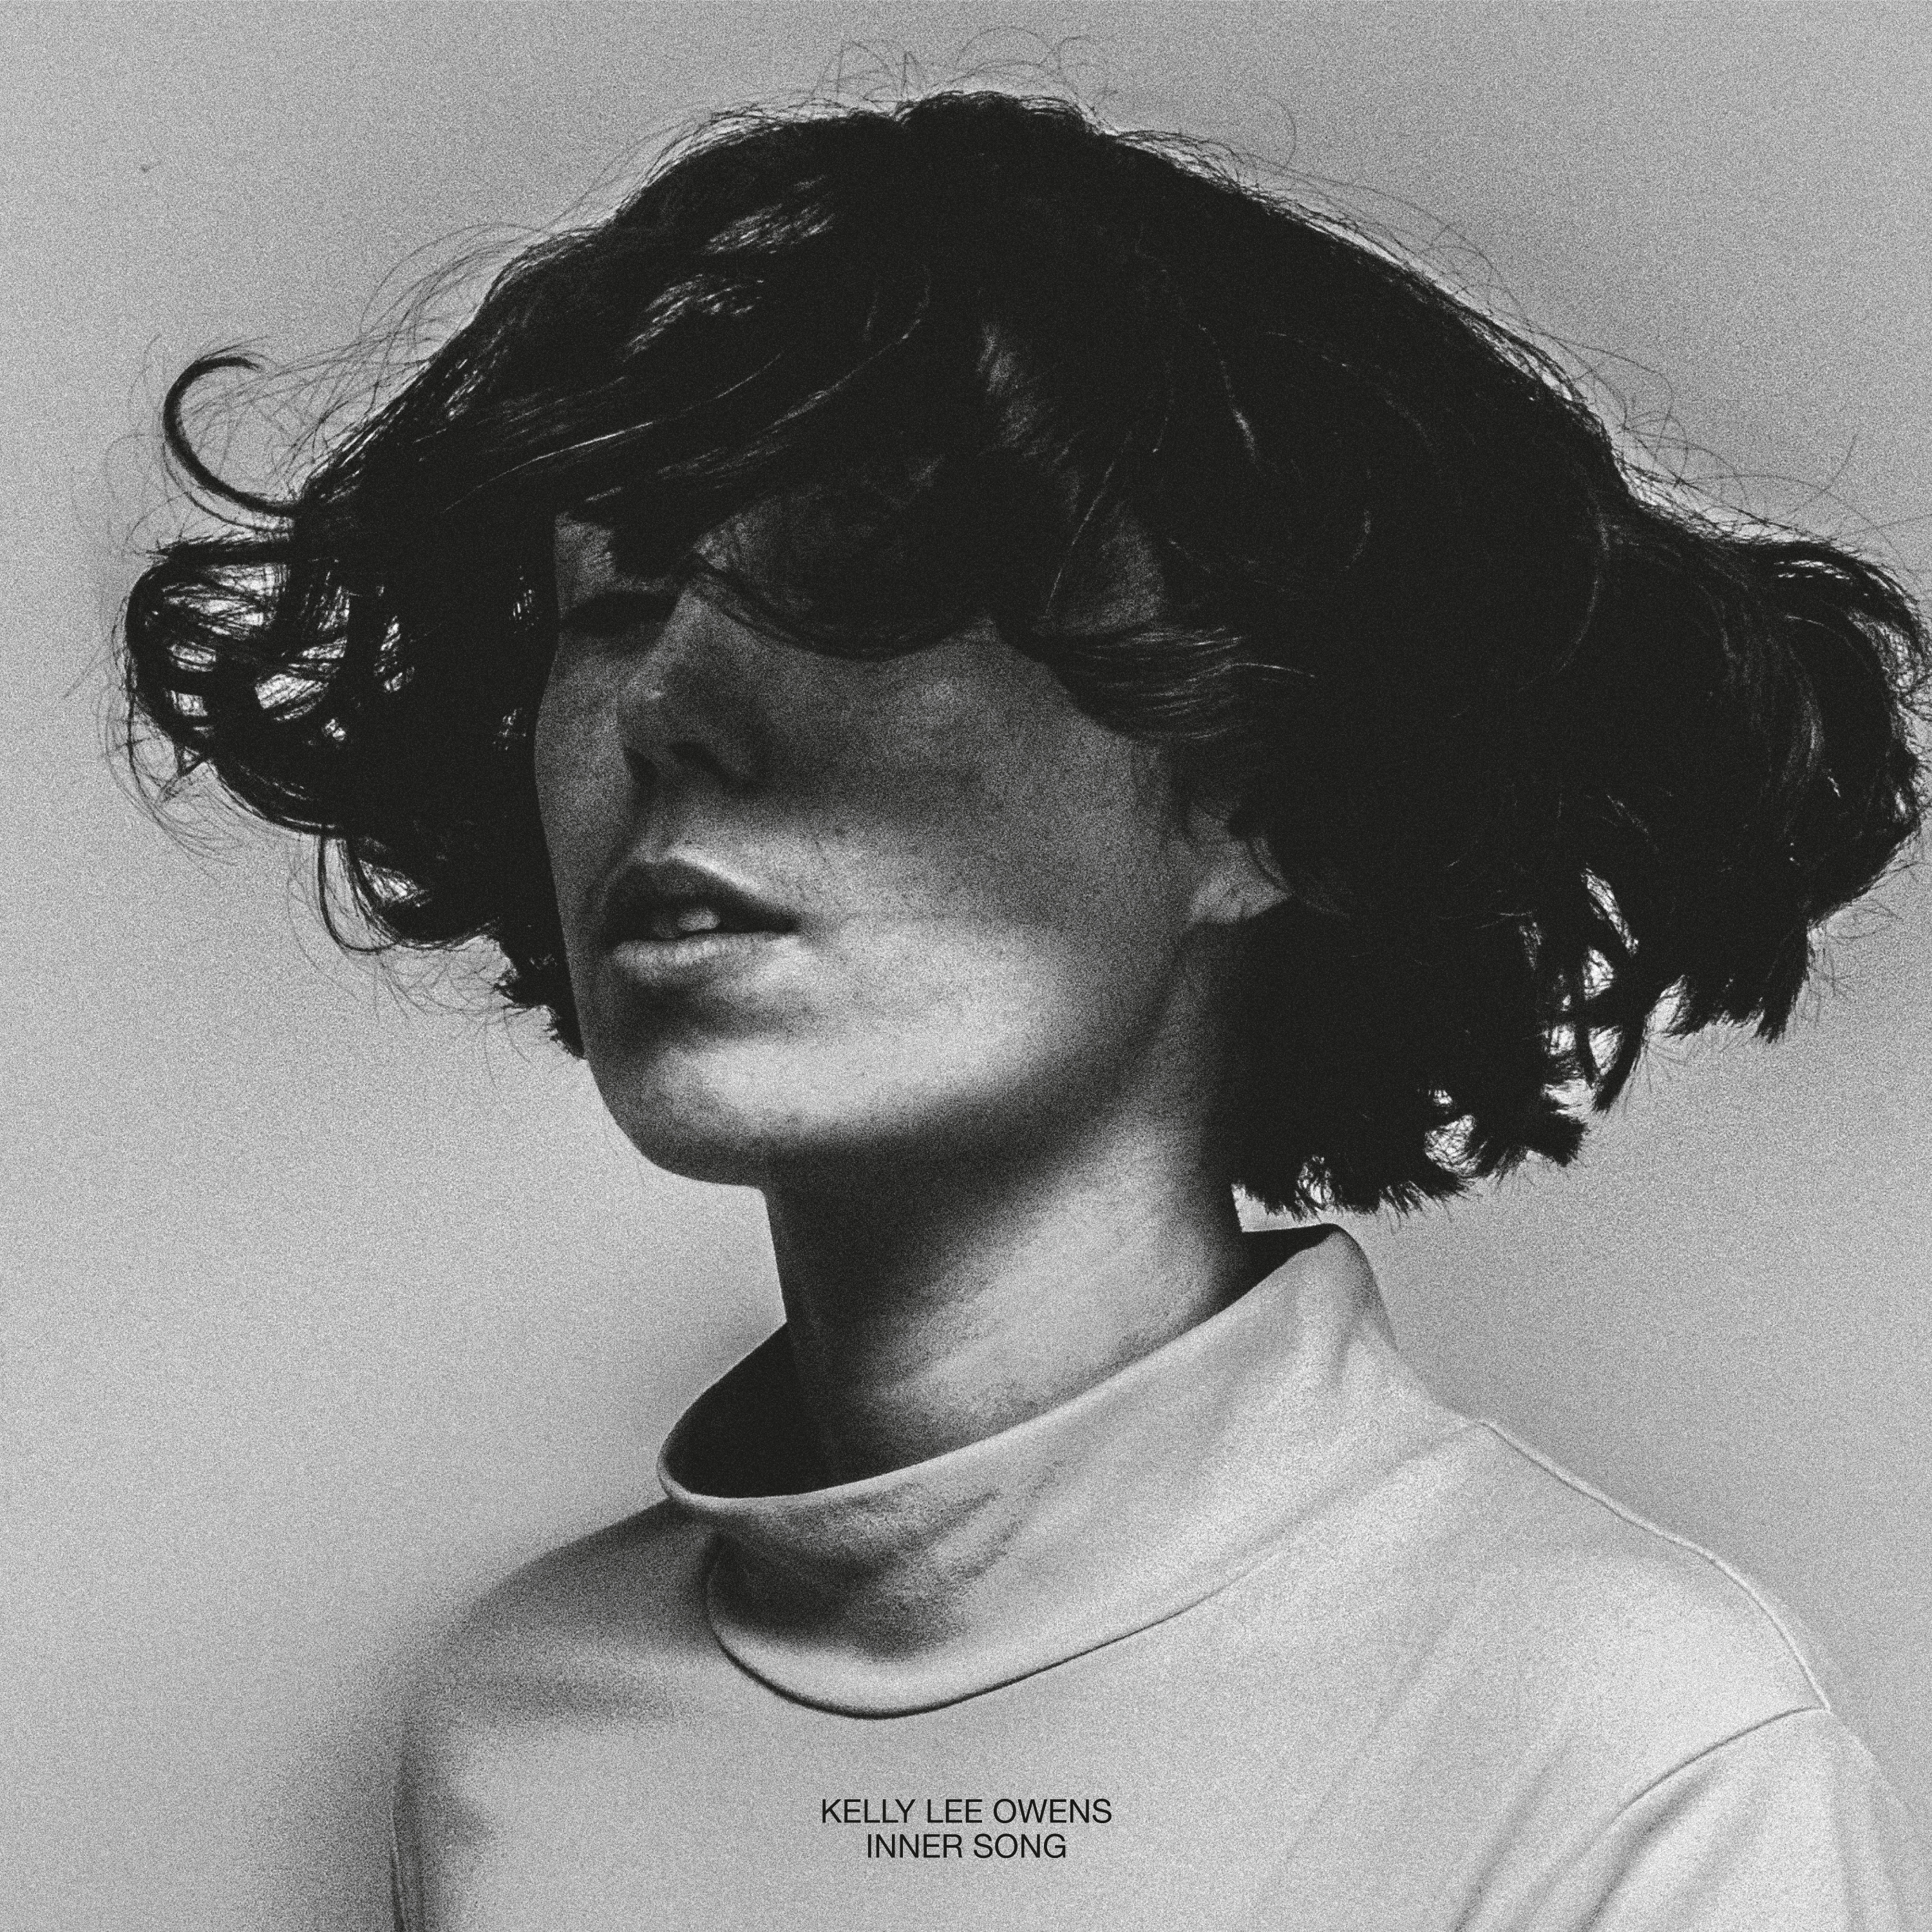 Inner Song by Kelly Lee Owens album cover